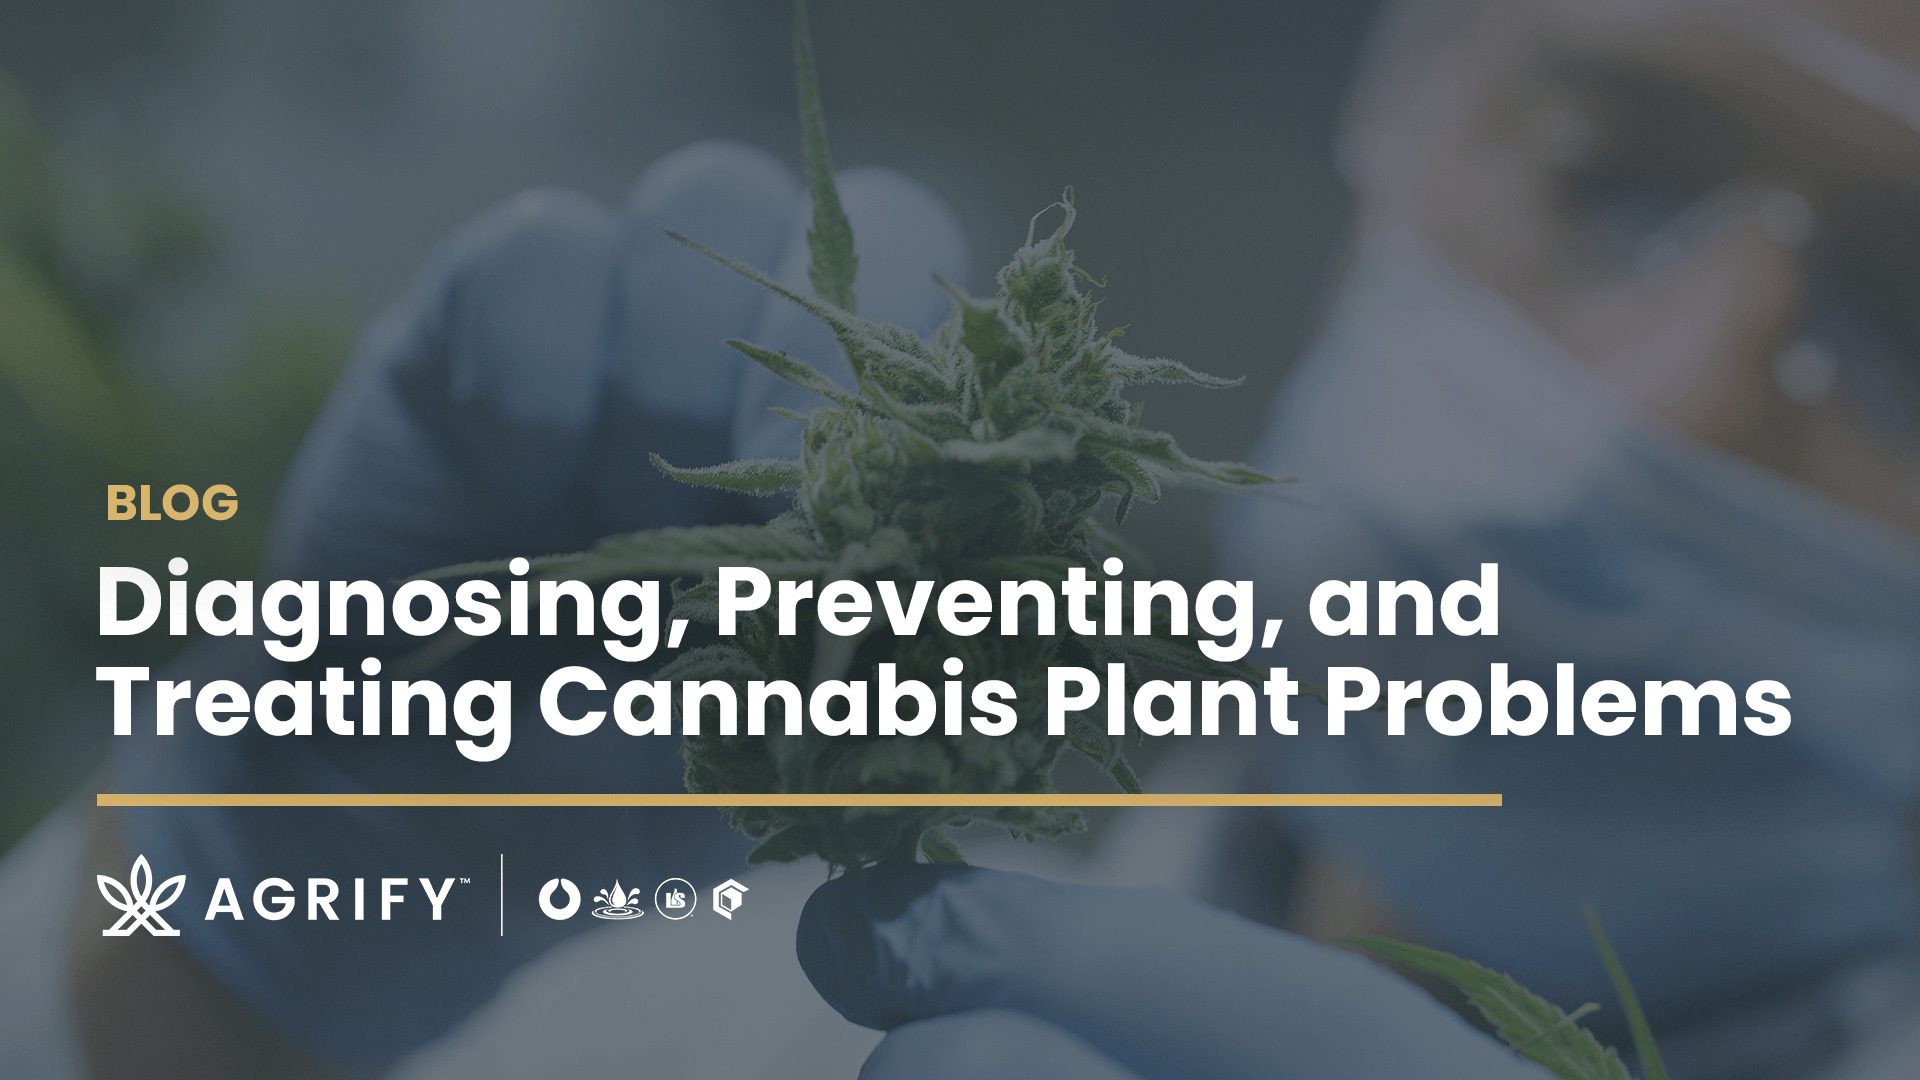 Diagnosing, Preventing, and Treating Cannabis Plant Problems